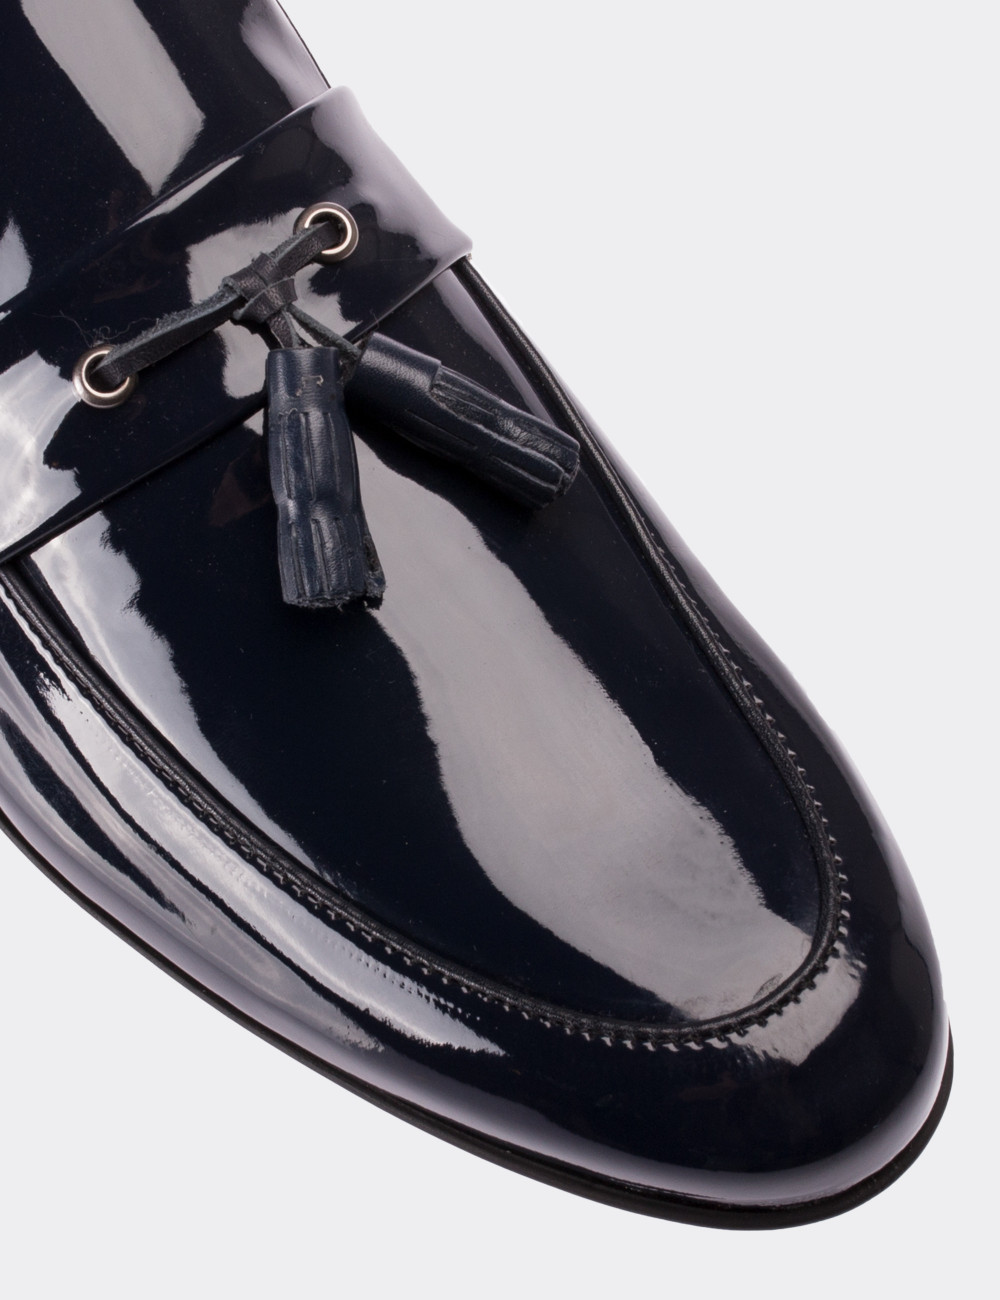 Navy Patent Leather Loafers - 01537MLCVC01